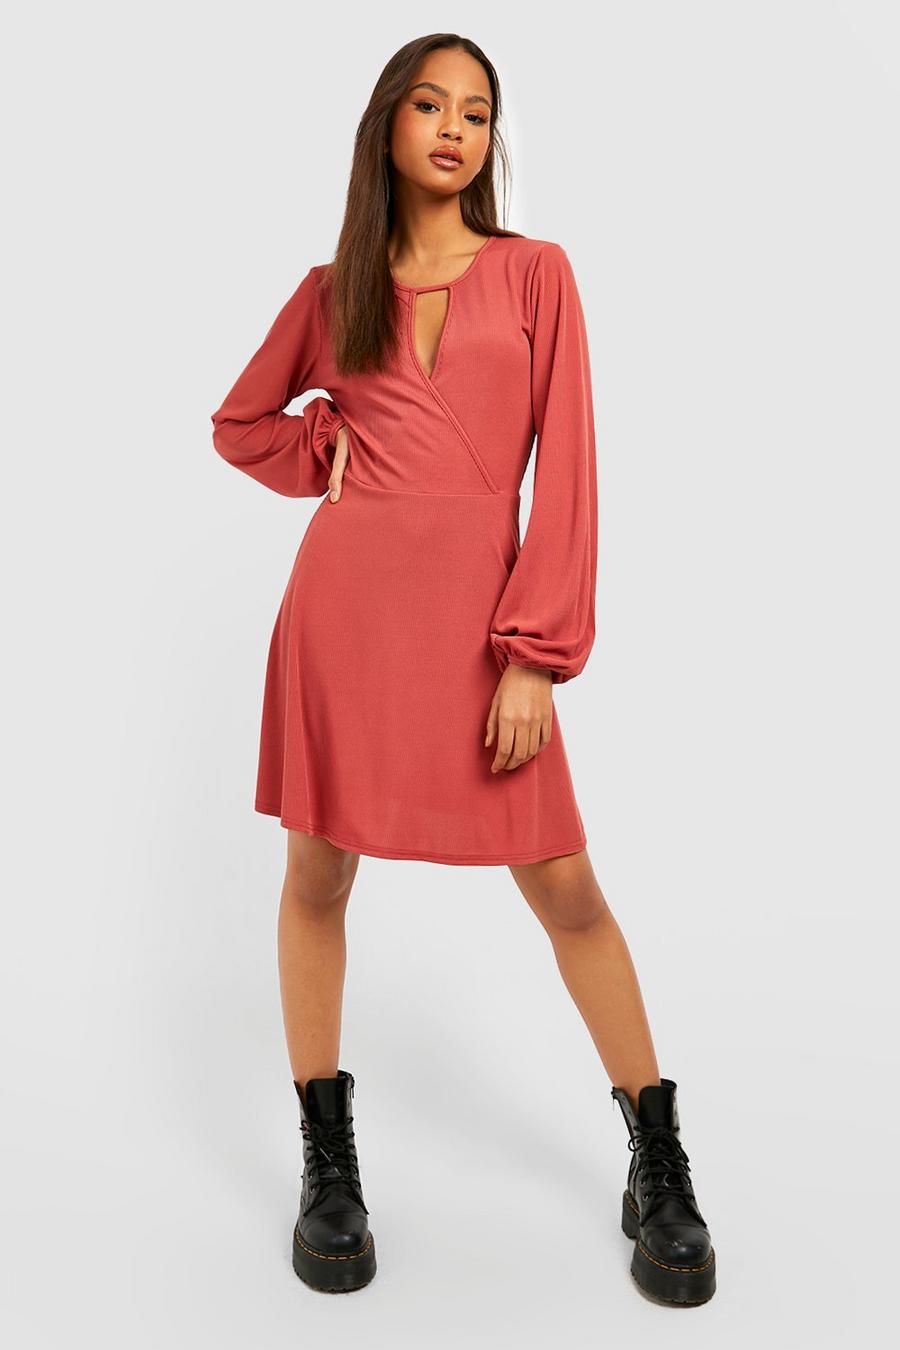 Dusty rose Cut Out Skater Dress image number 1